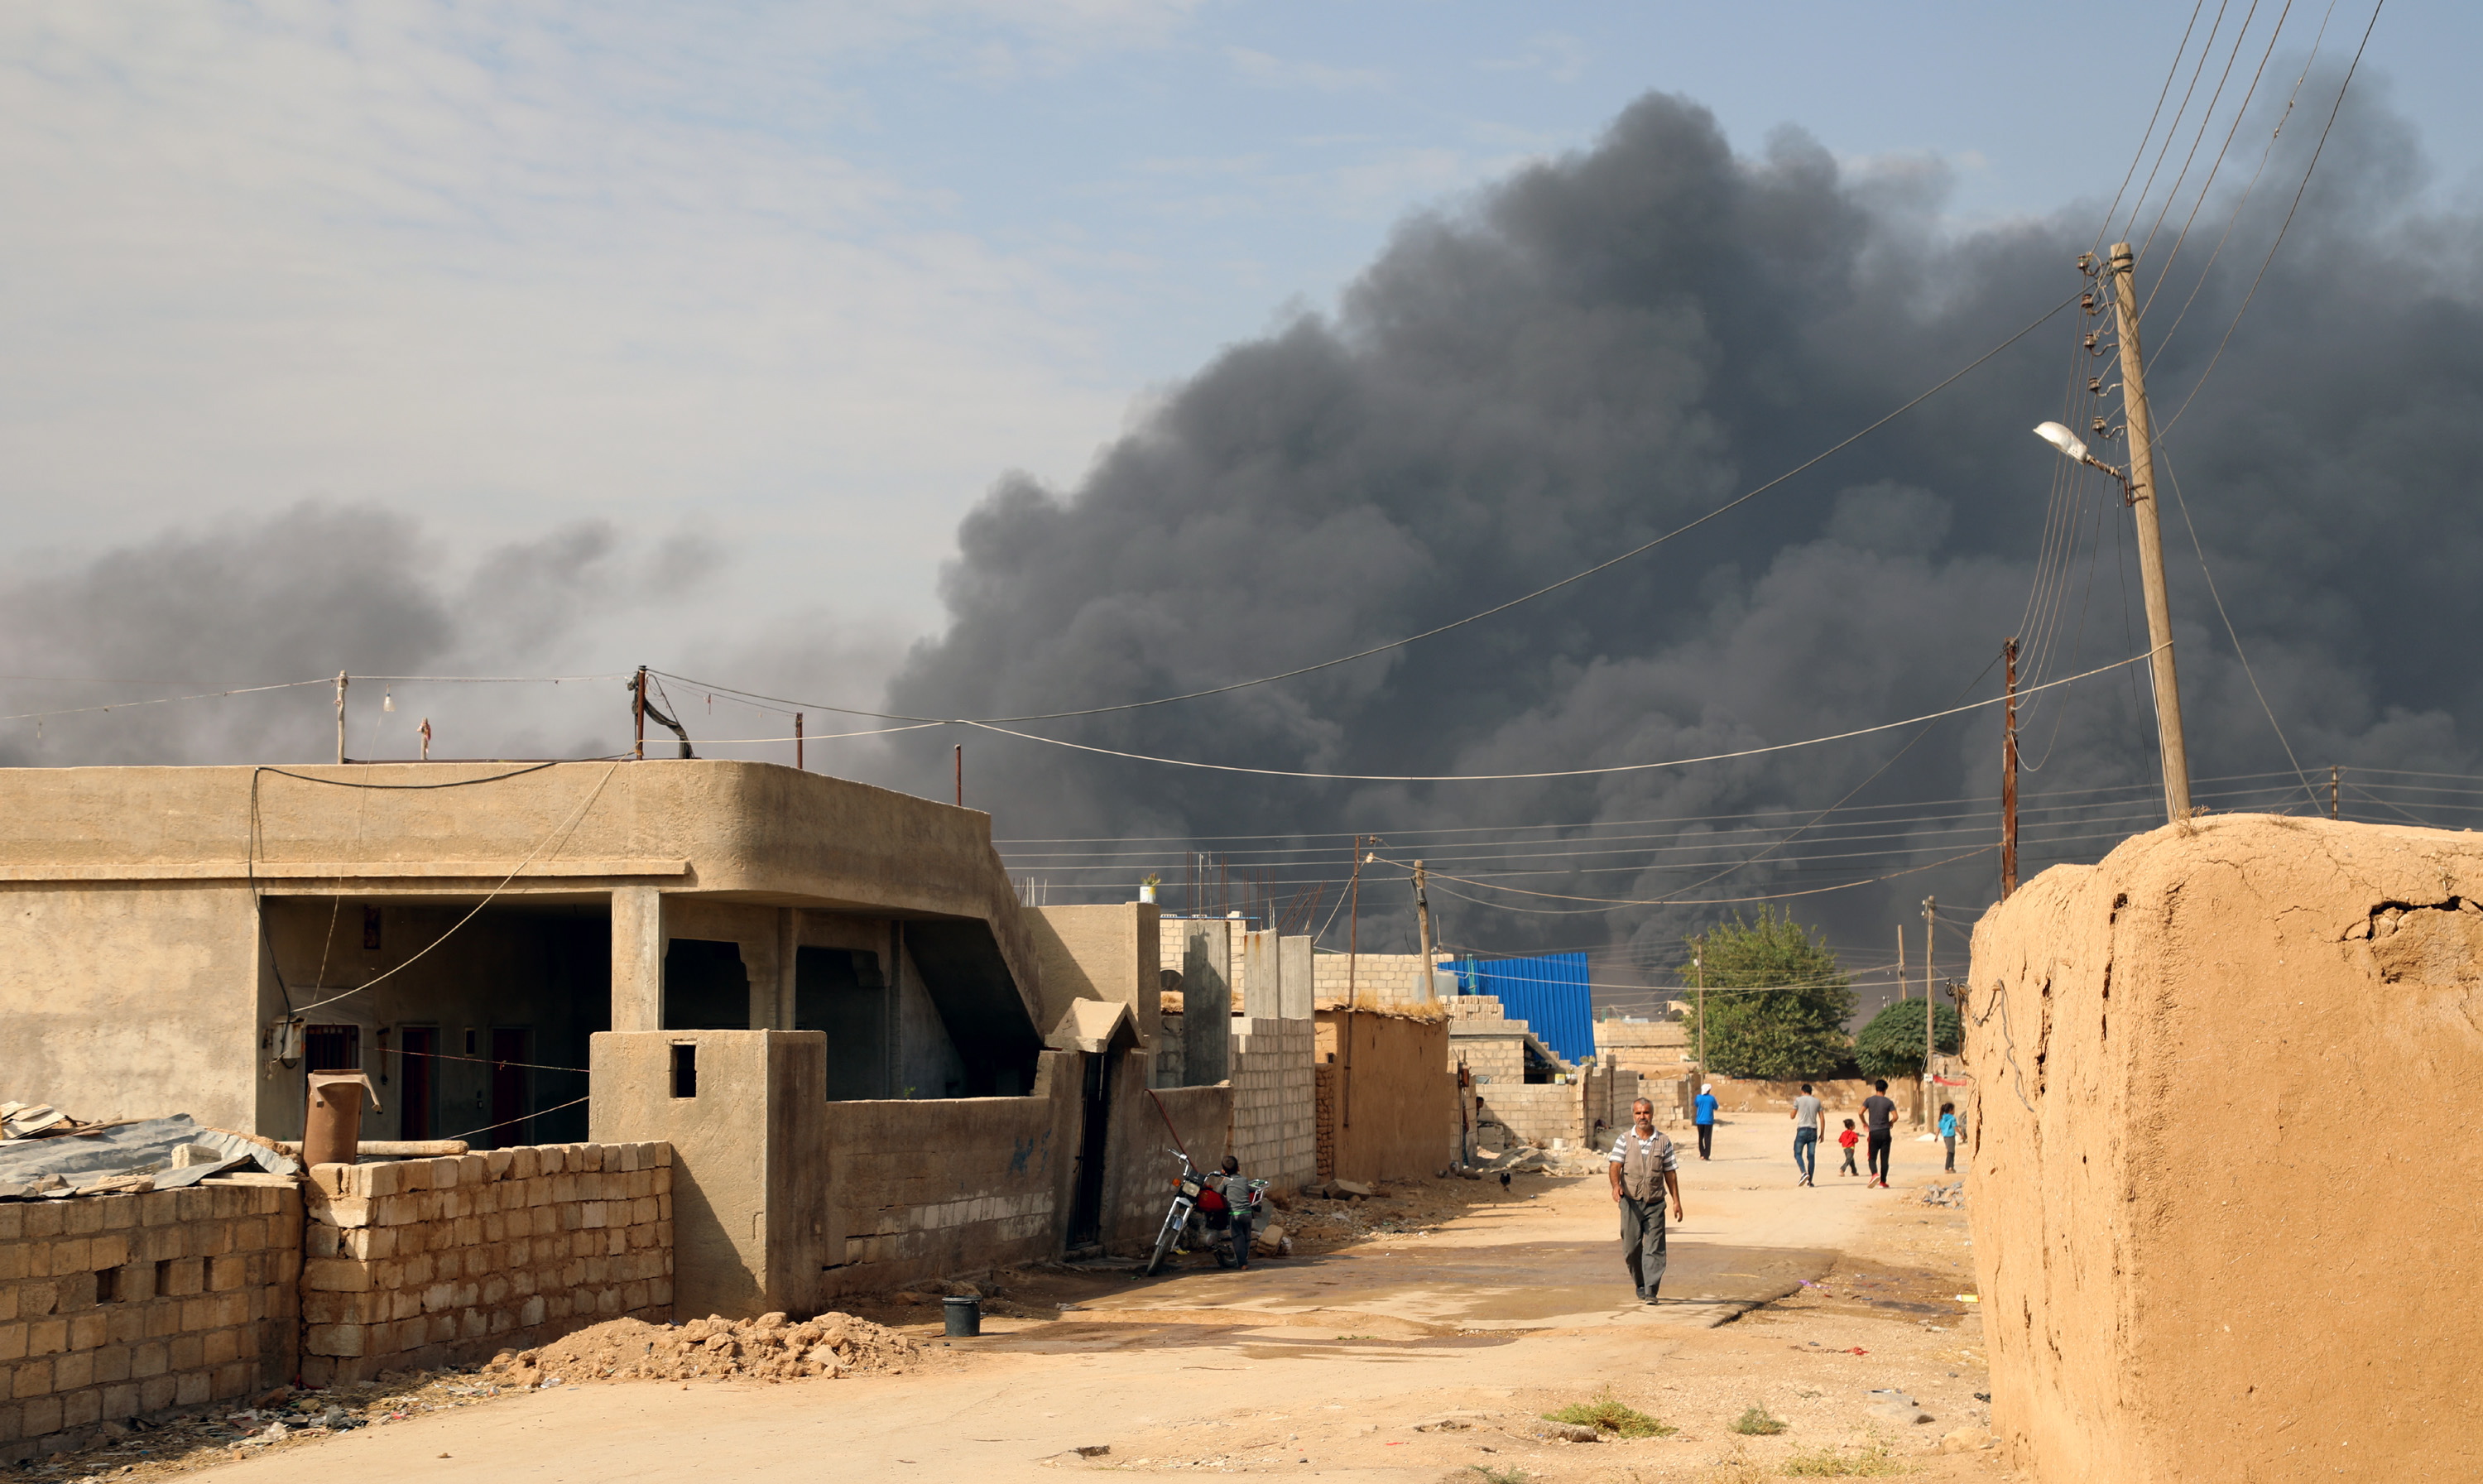 epa07927386 A general view showing smoke clouds rising from the scene of clashes between the Syria democratic forces (SDF) and Turkish troops and their Syrian opposition allies near Ras al-Ain town, northeastern of Syria on 17 October 2019. The Turkish offensive in northeastern Syria against Kurdish militants has displaced more than 300,000 people, human rights organizations said.  EPA/AHMED MARDNLI